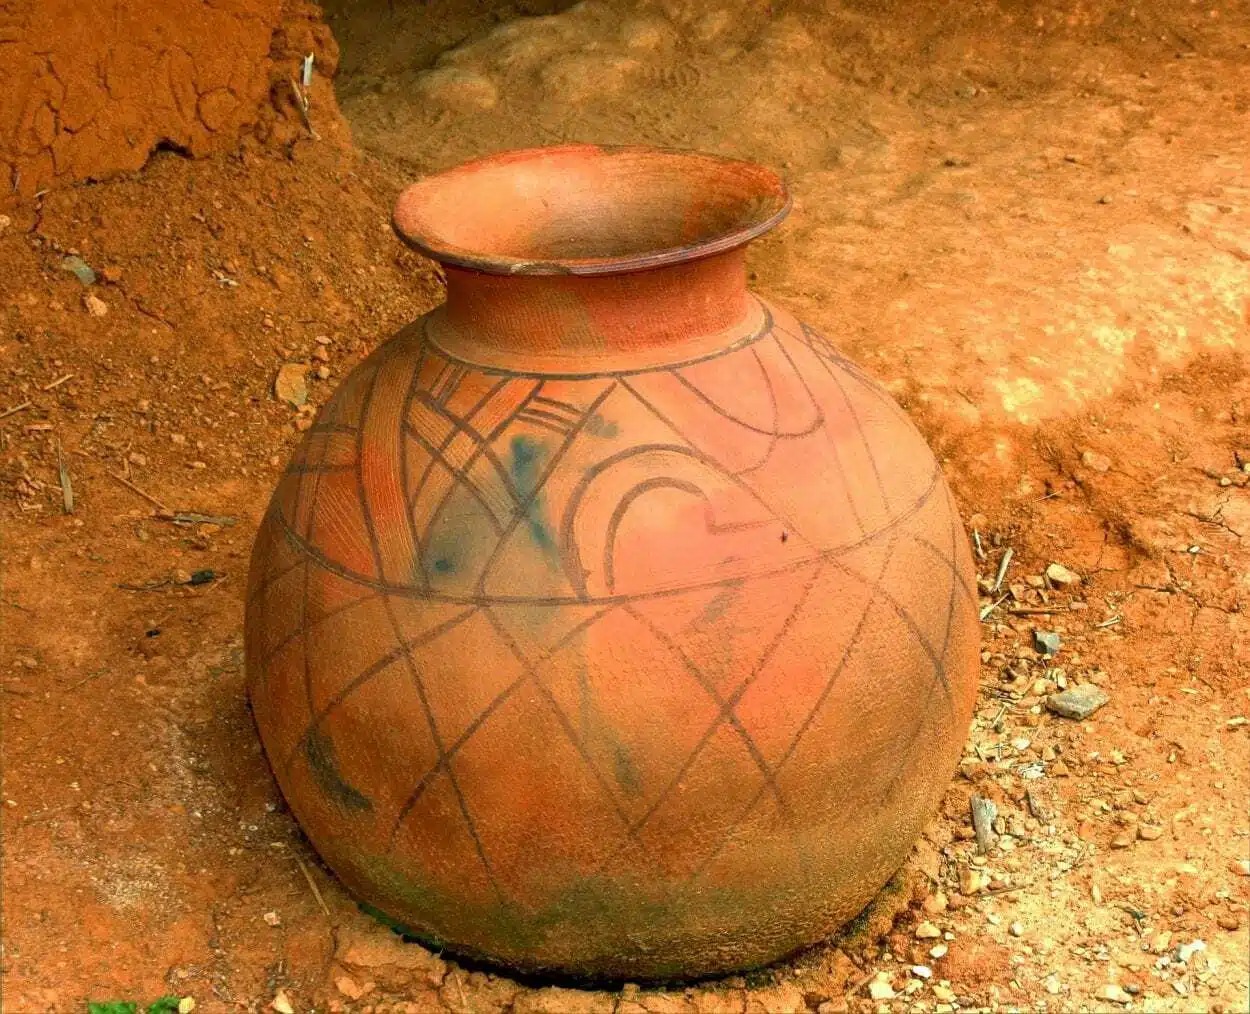 ARCHAEOLOGY: CERAMIC COOKING POTS RECORD HISTORY OF ANCIENT FOOD PRACTICES